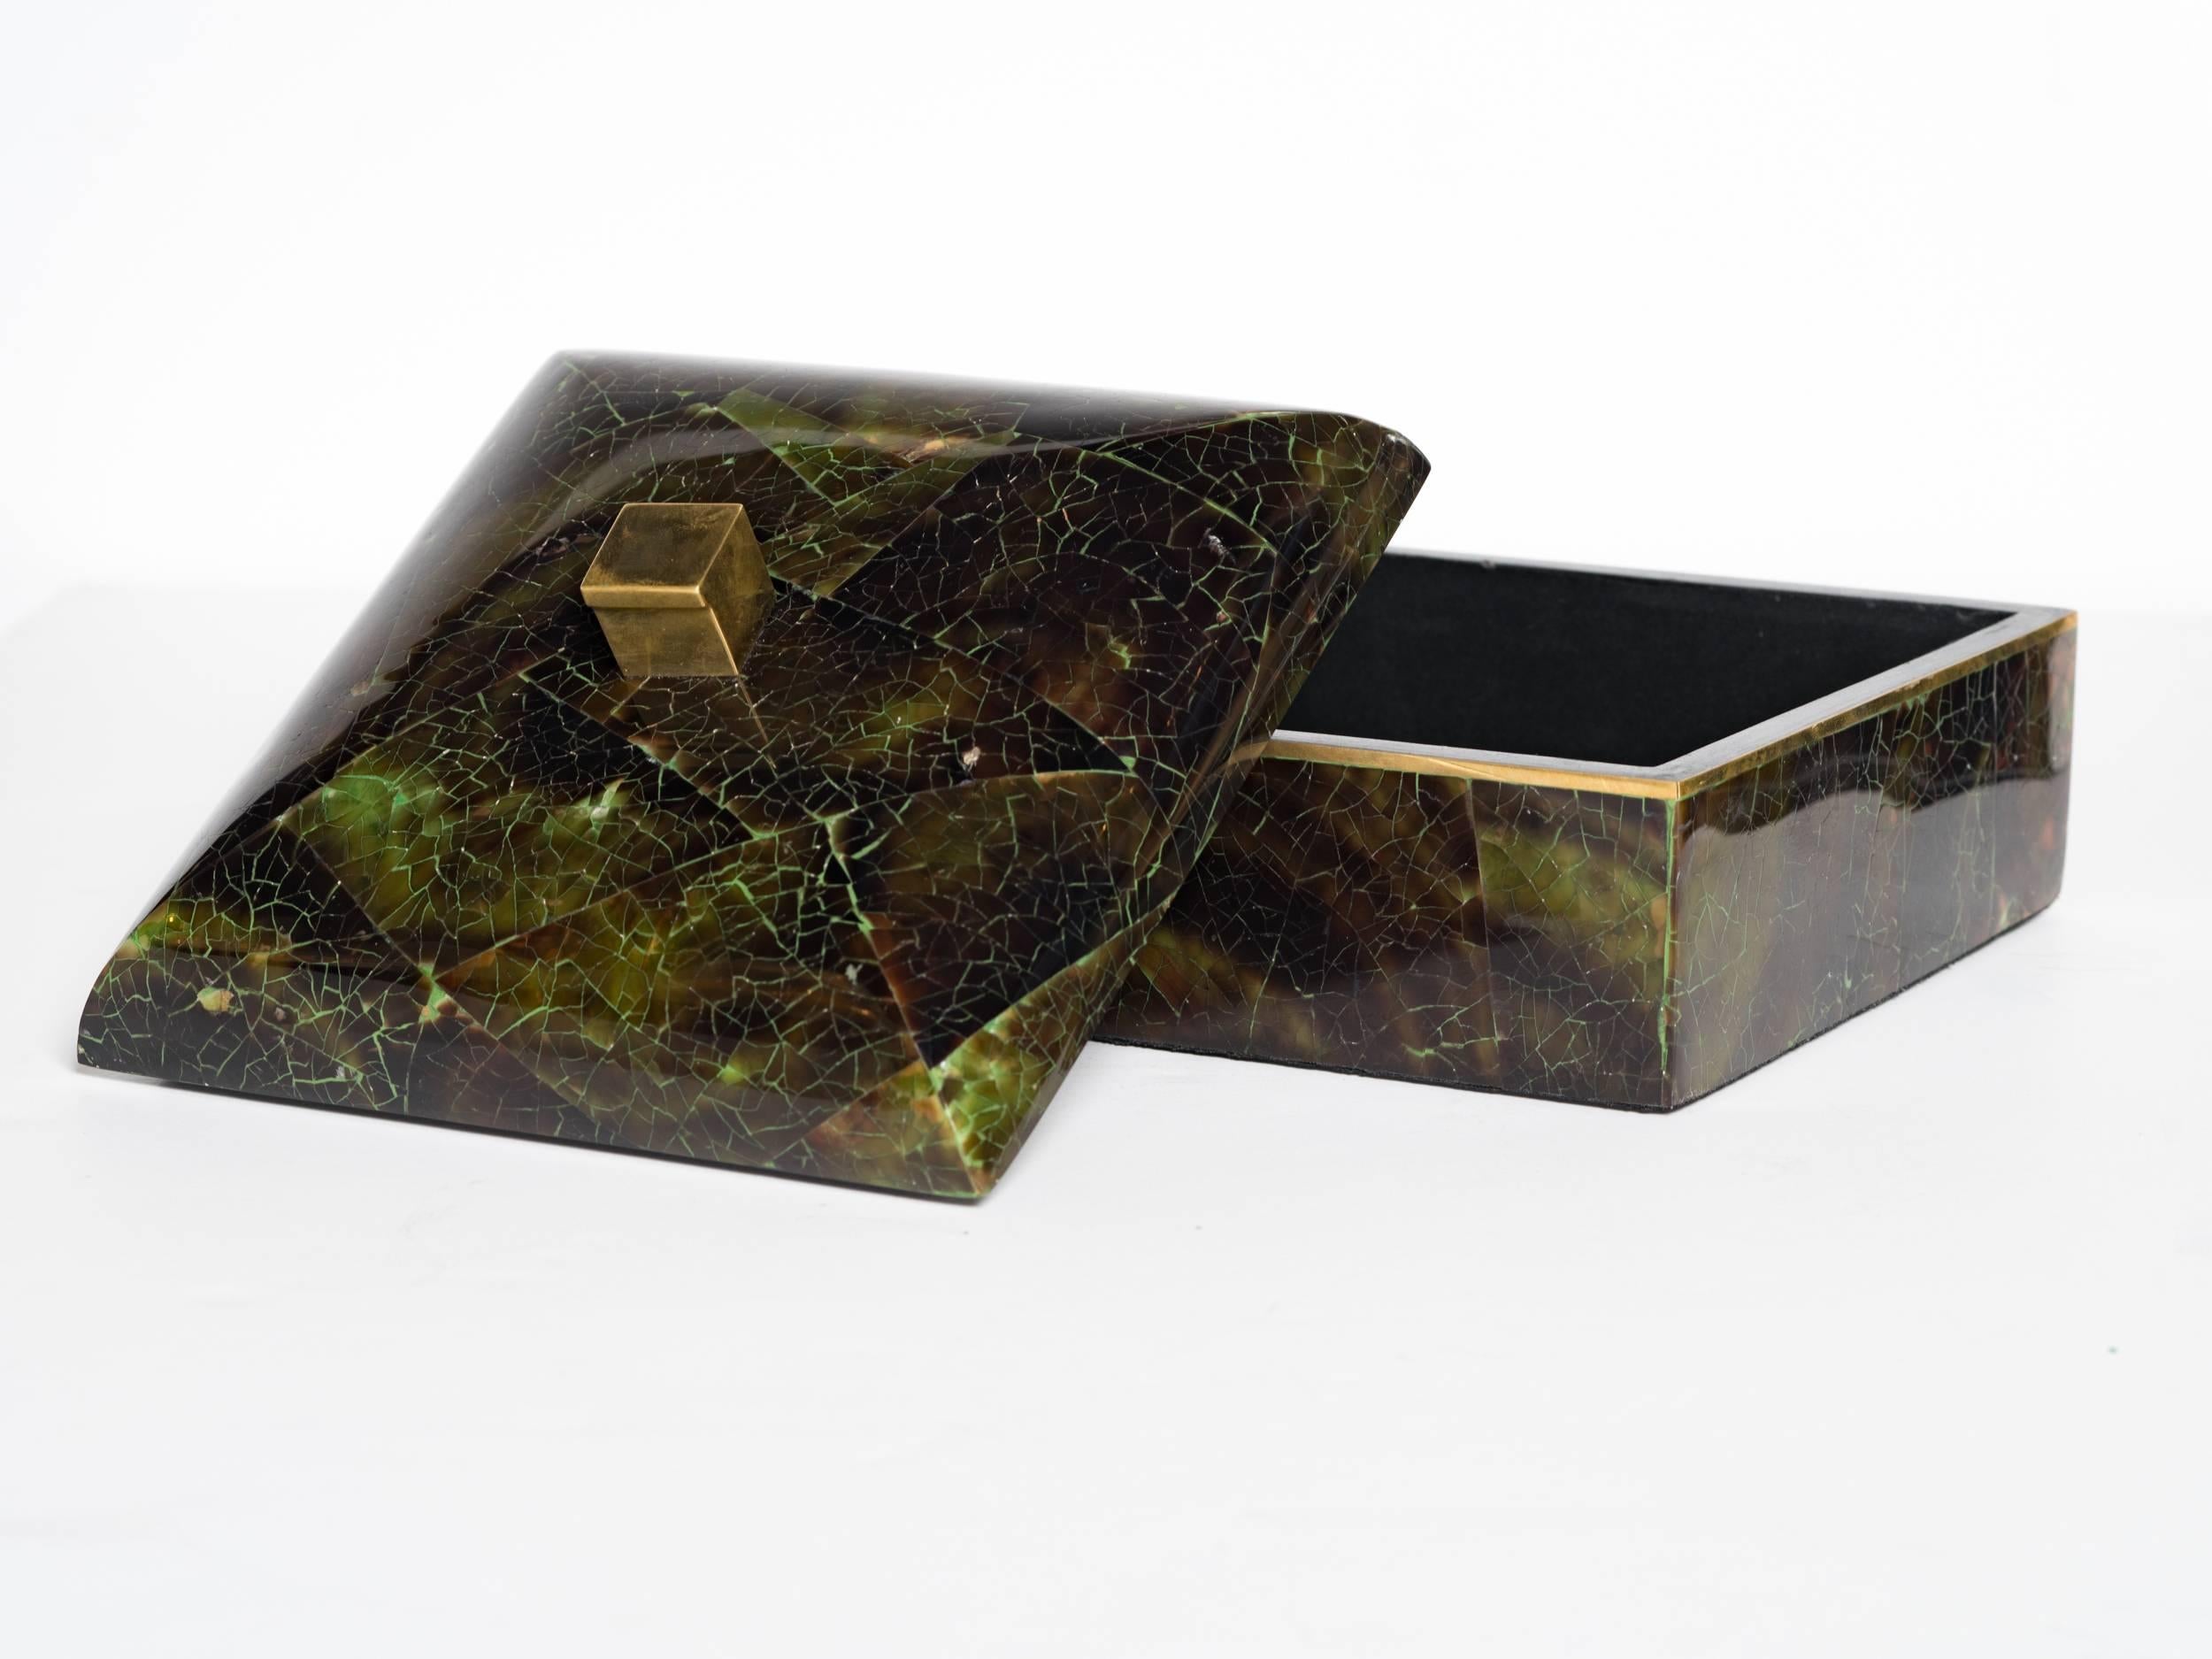 Exotic handcrafted decorative box comprised of lacquered natural green tab shell. The box has a chic square form with dome lid and features a stylized brass finial and brass trim detail. The box features a geometric pattern design and the interior